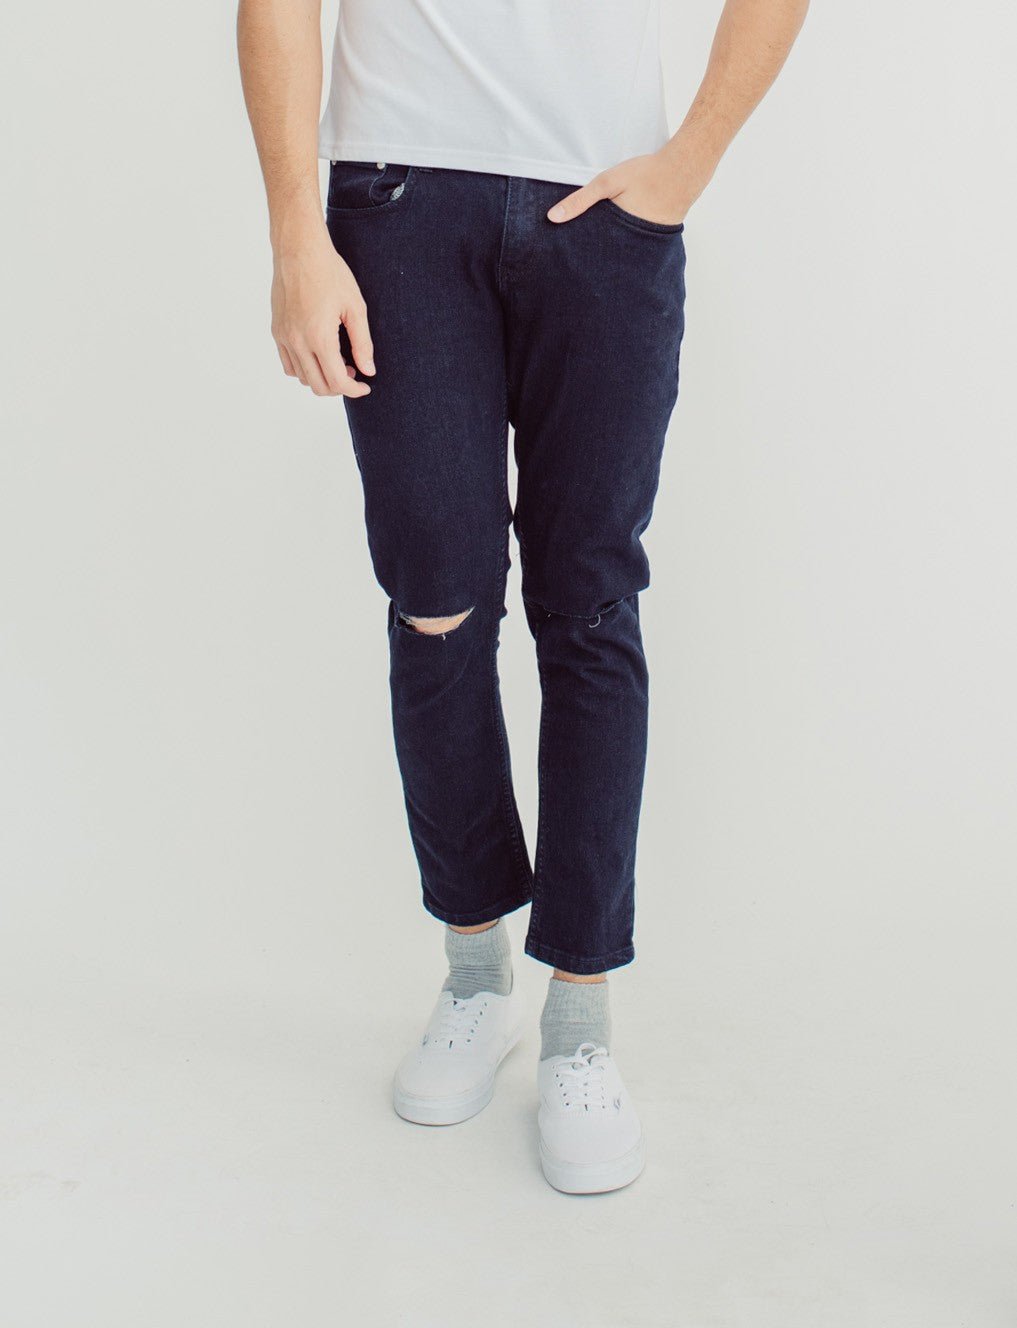 Black Skinny Low Rise Ripped Cropped Jeans - Mossimo PH